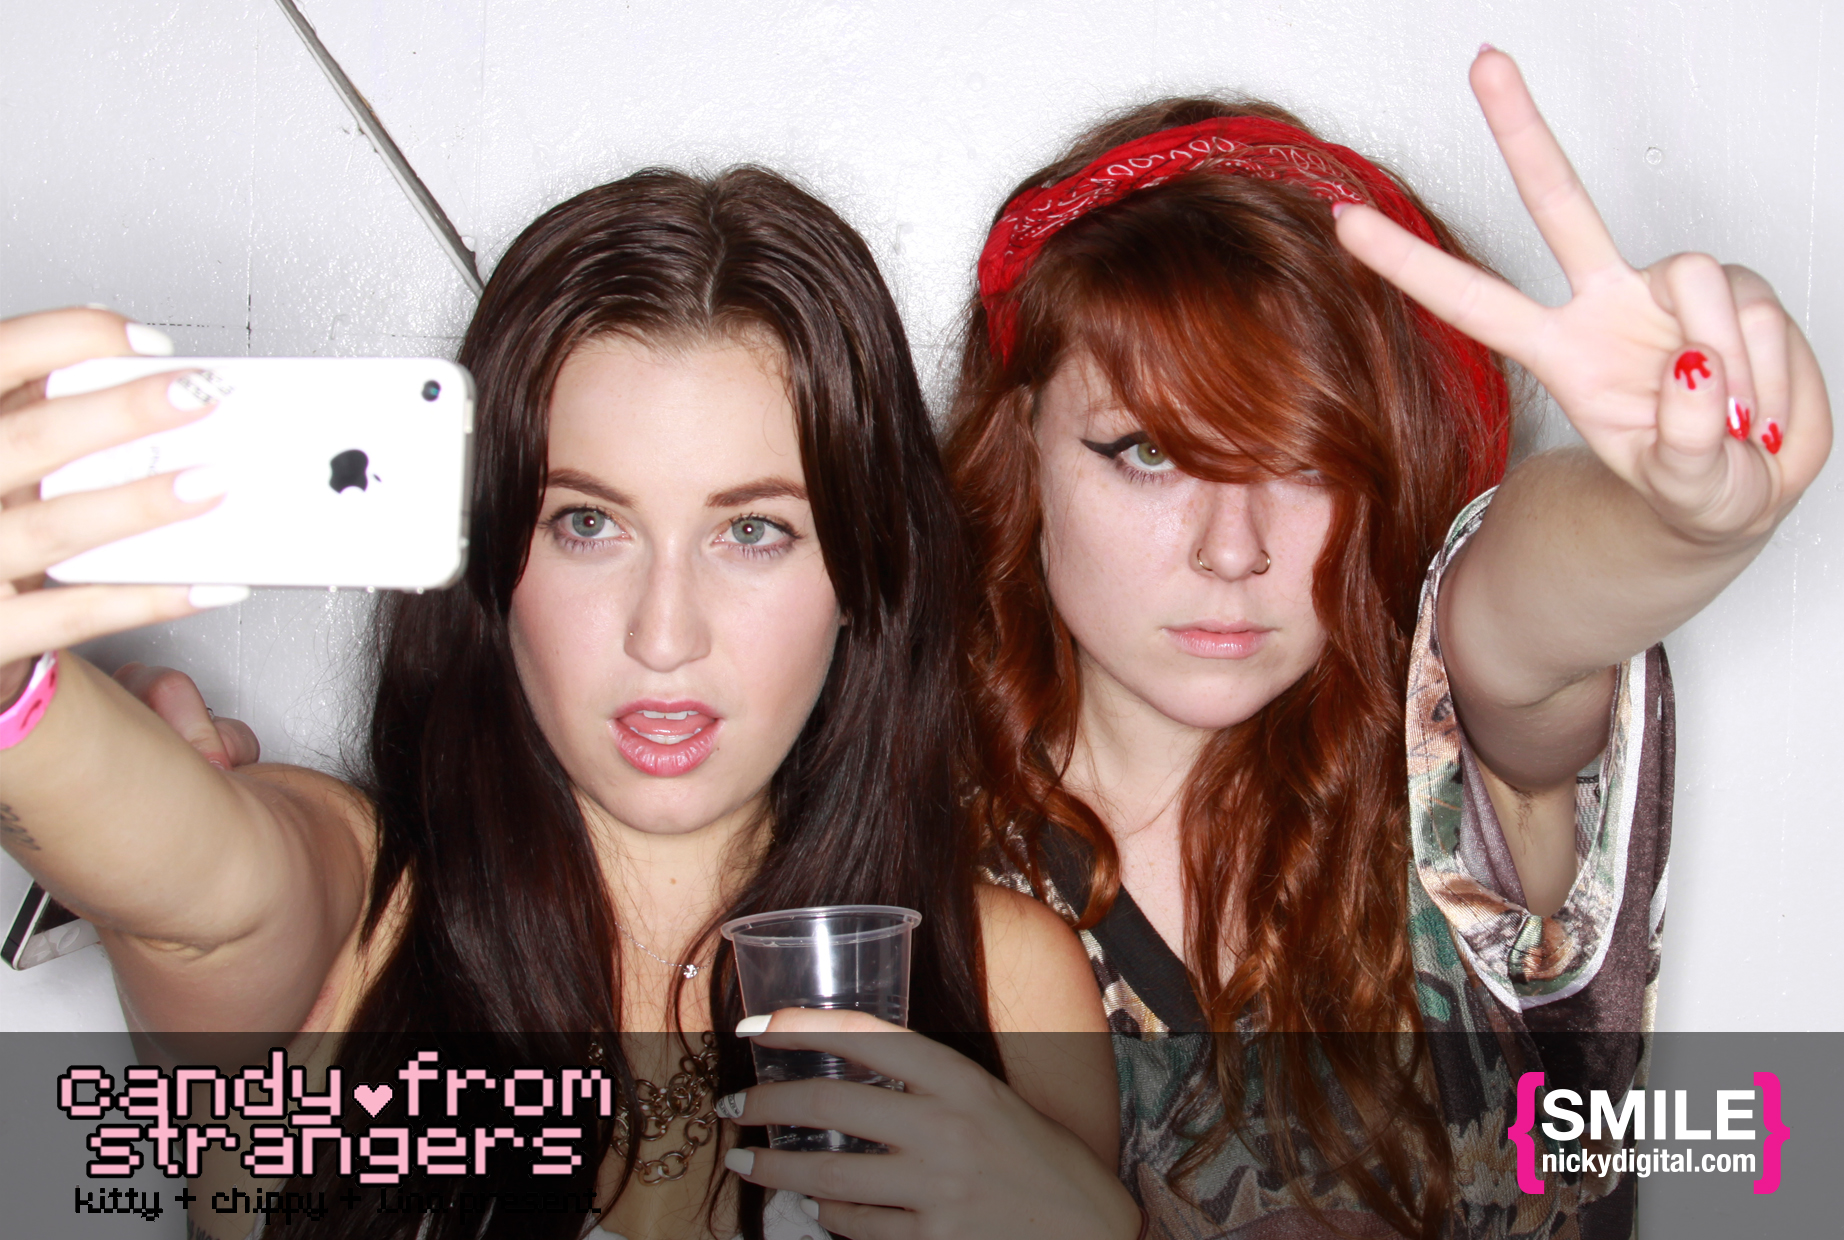 ♡CANDY♡FROM♡STRANGERS♡ Photo Booth at 285 Kent on September 30, 2013